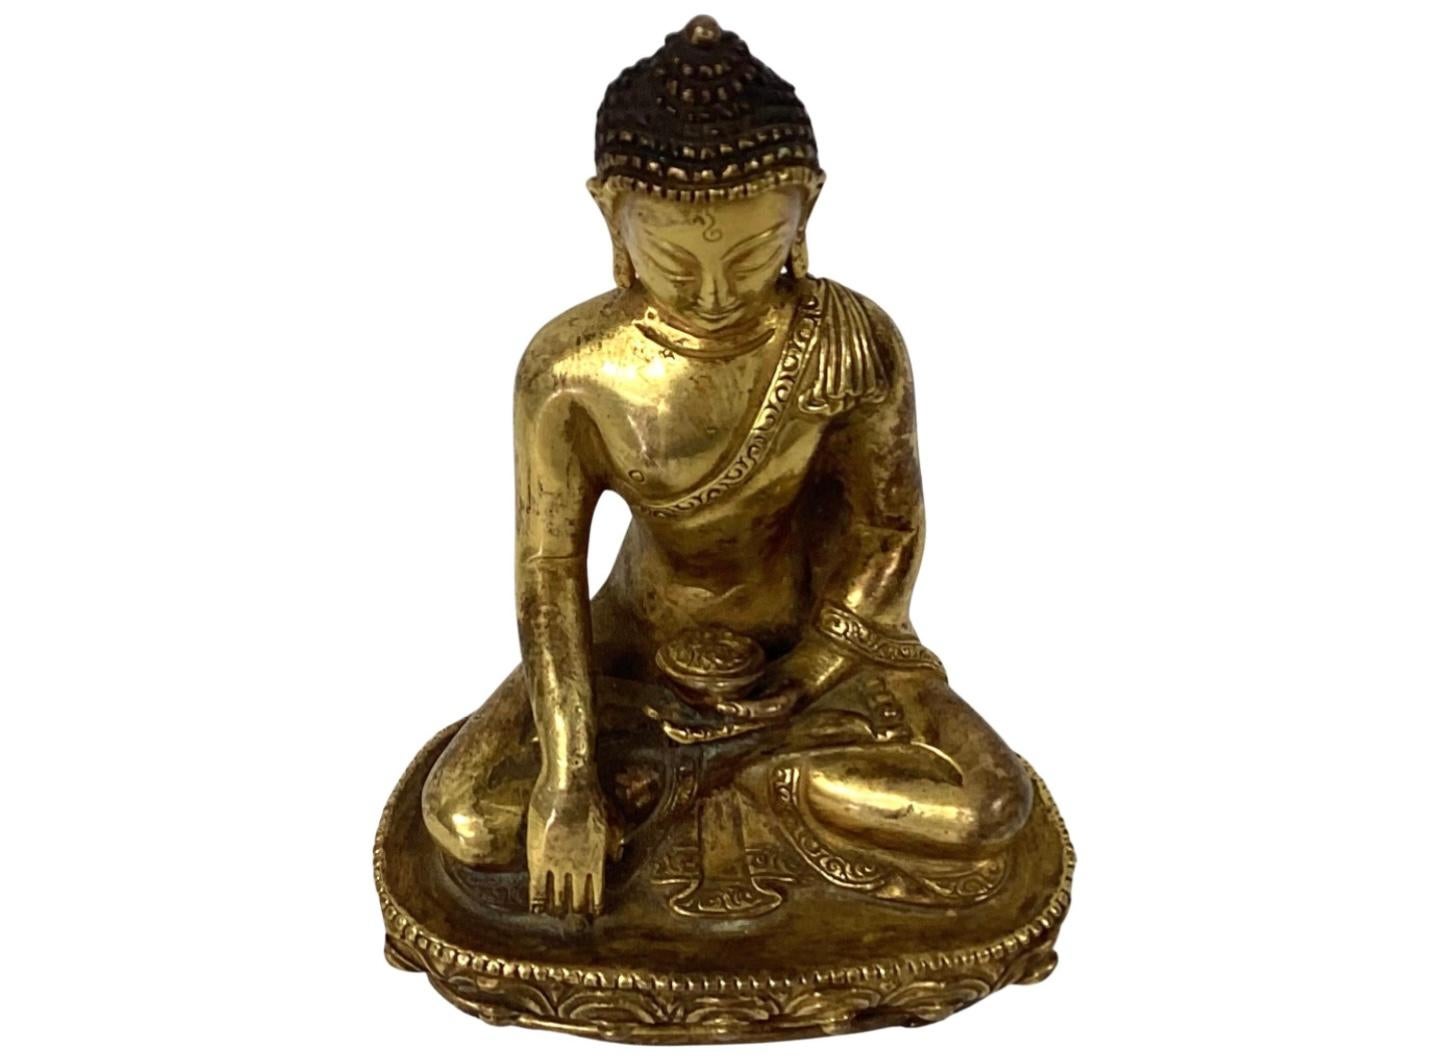 18th century seated gilt bronze buddha. 5.5 inches height. Very good condition.